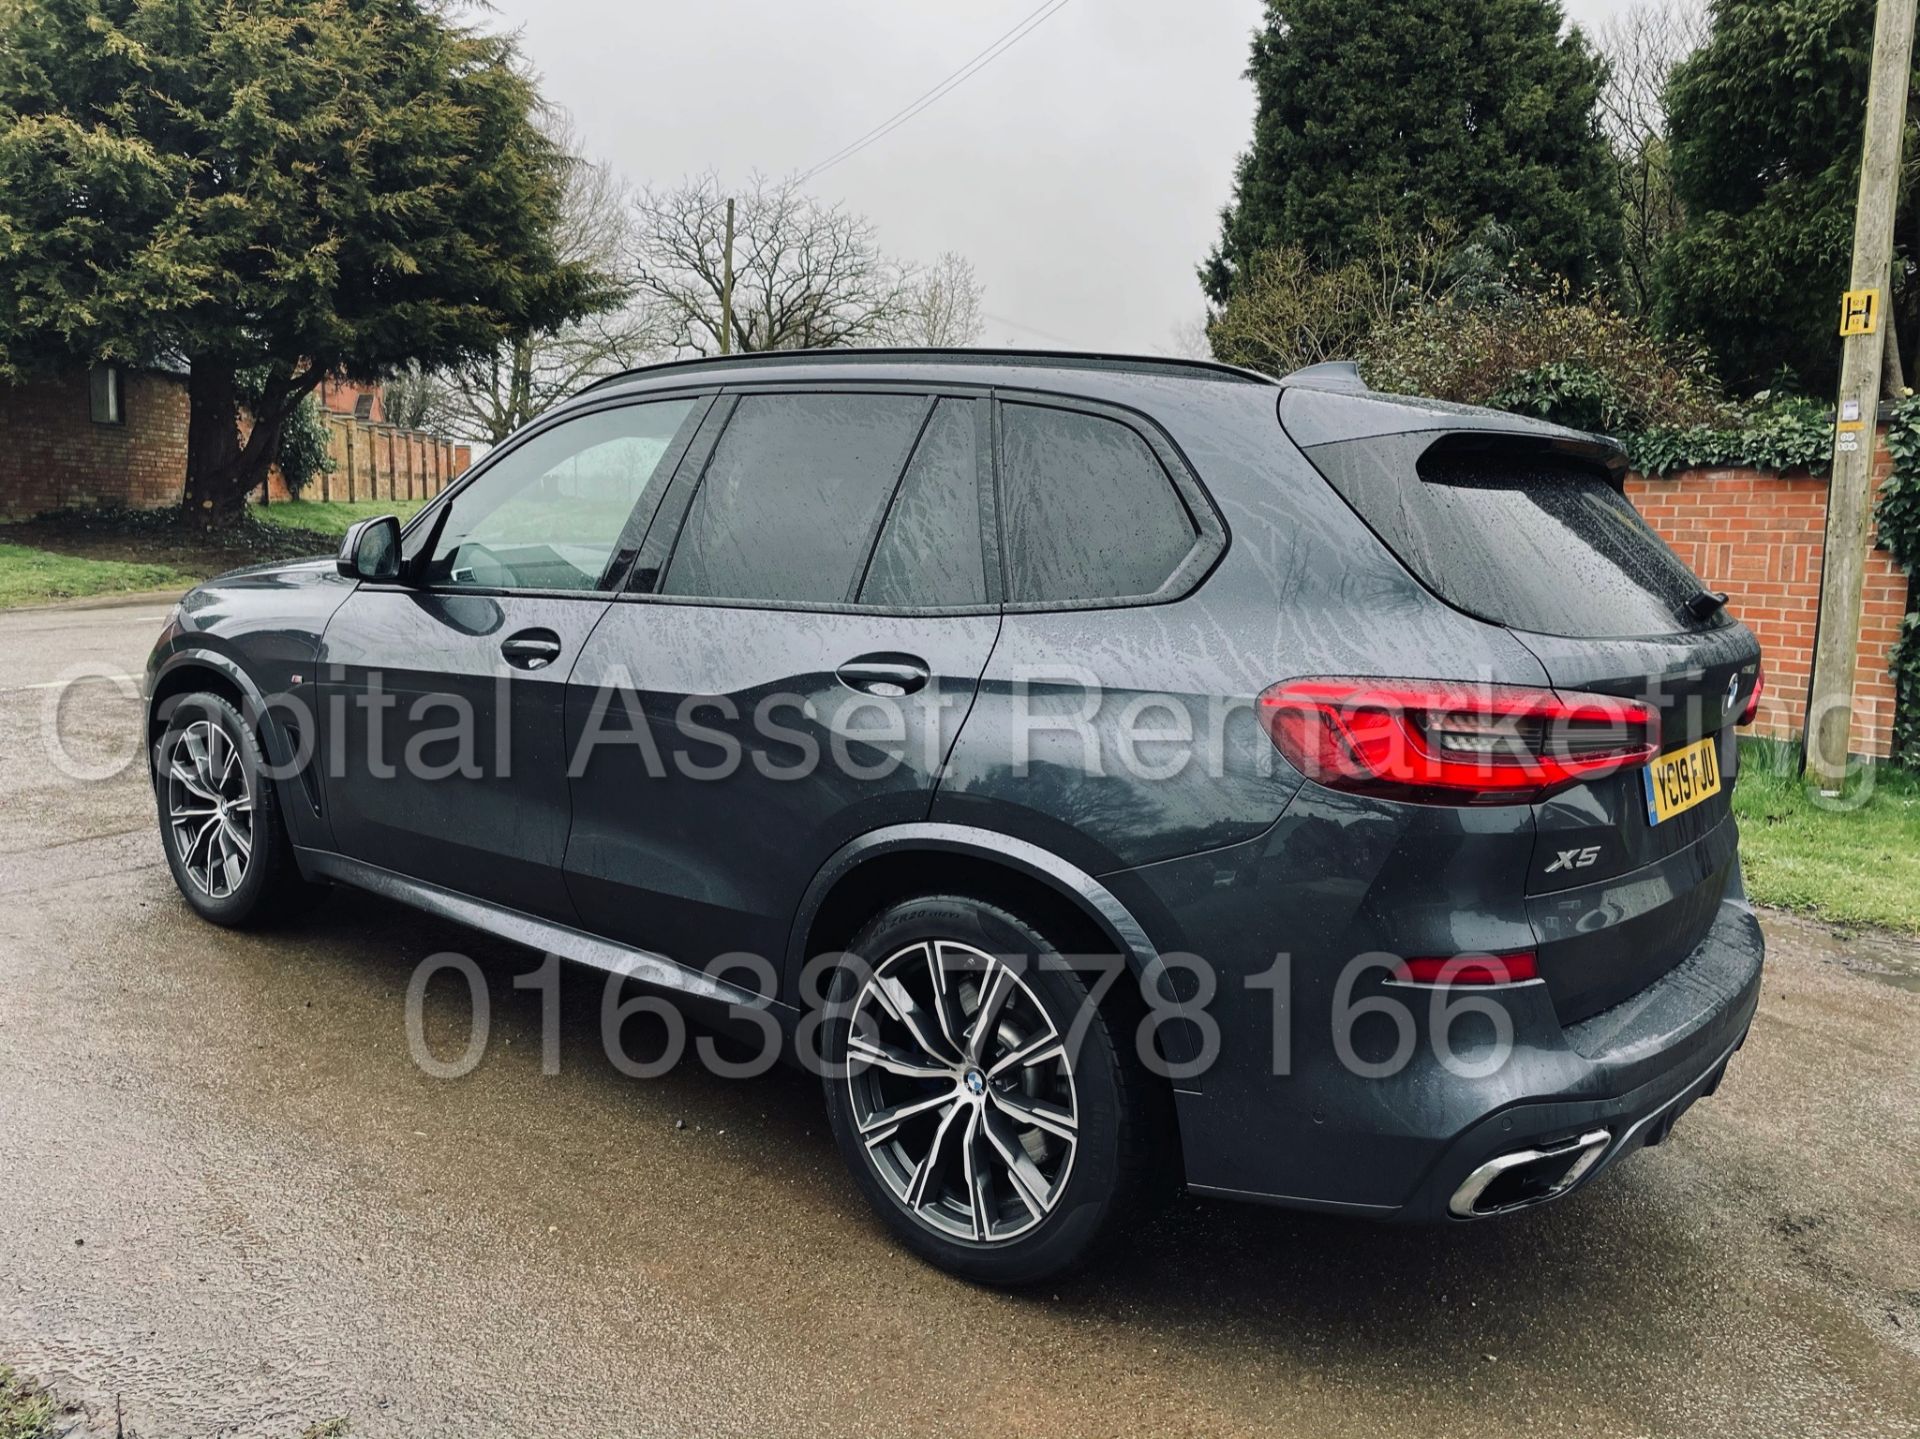 (On Sale) BMW X5 *M SPORT* X-DRIVE *7 SEATER* (2019-EURO 6) '3.0 DIESEL - AUTO' *SAT NAV & PAN ROOF* - Image 9 of 70